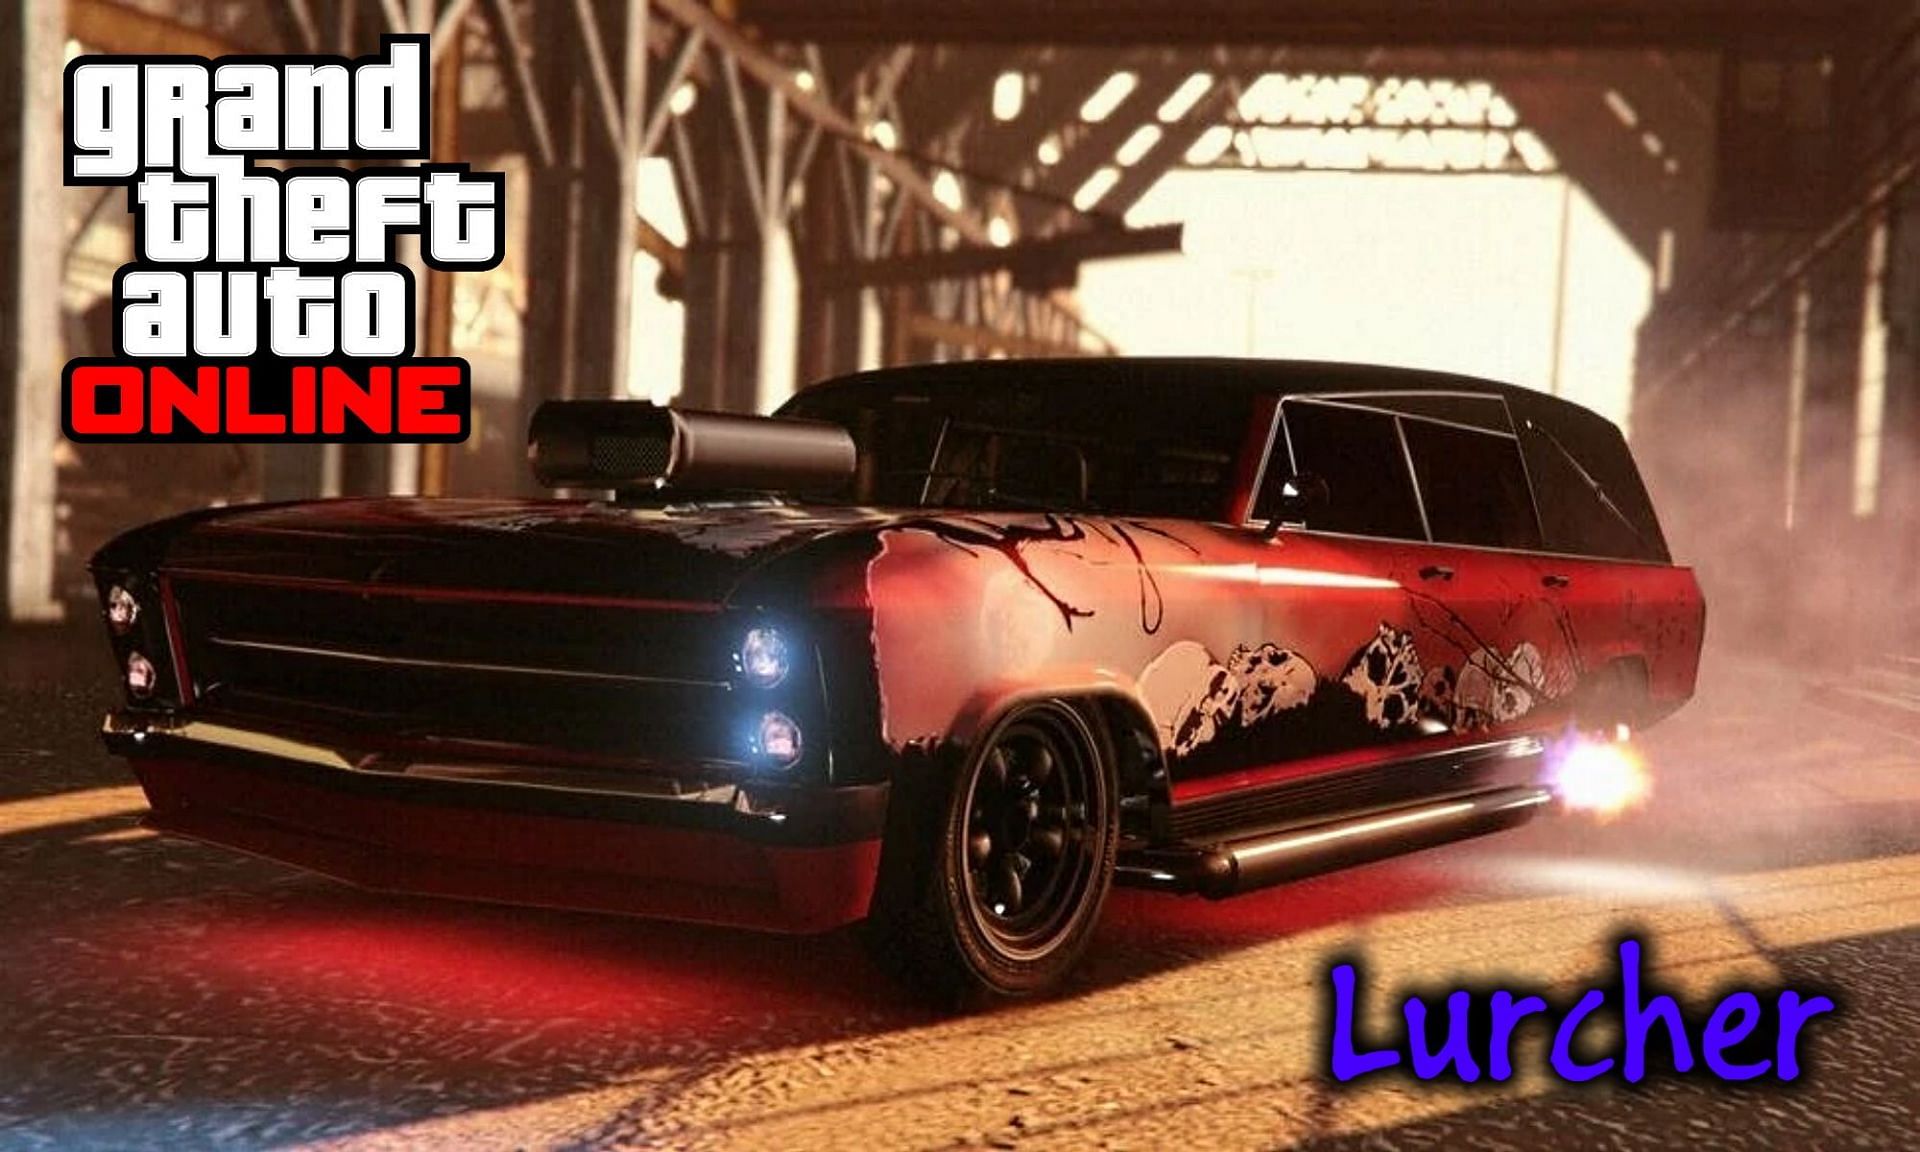 GTA Online players will become undertakers with this fancy hearse (Image via Rockstar Games)